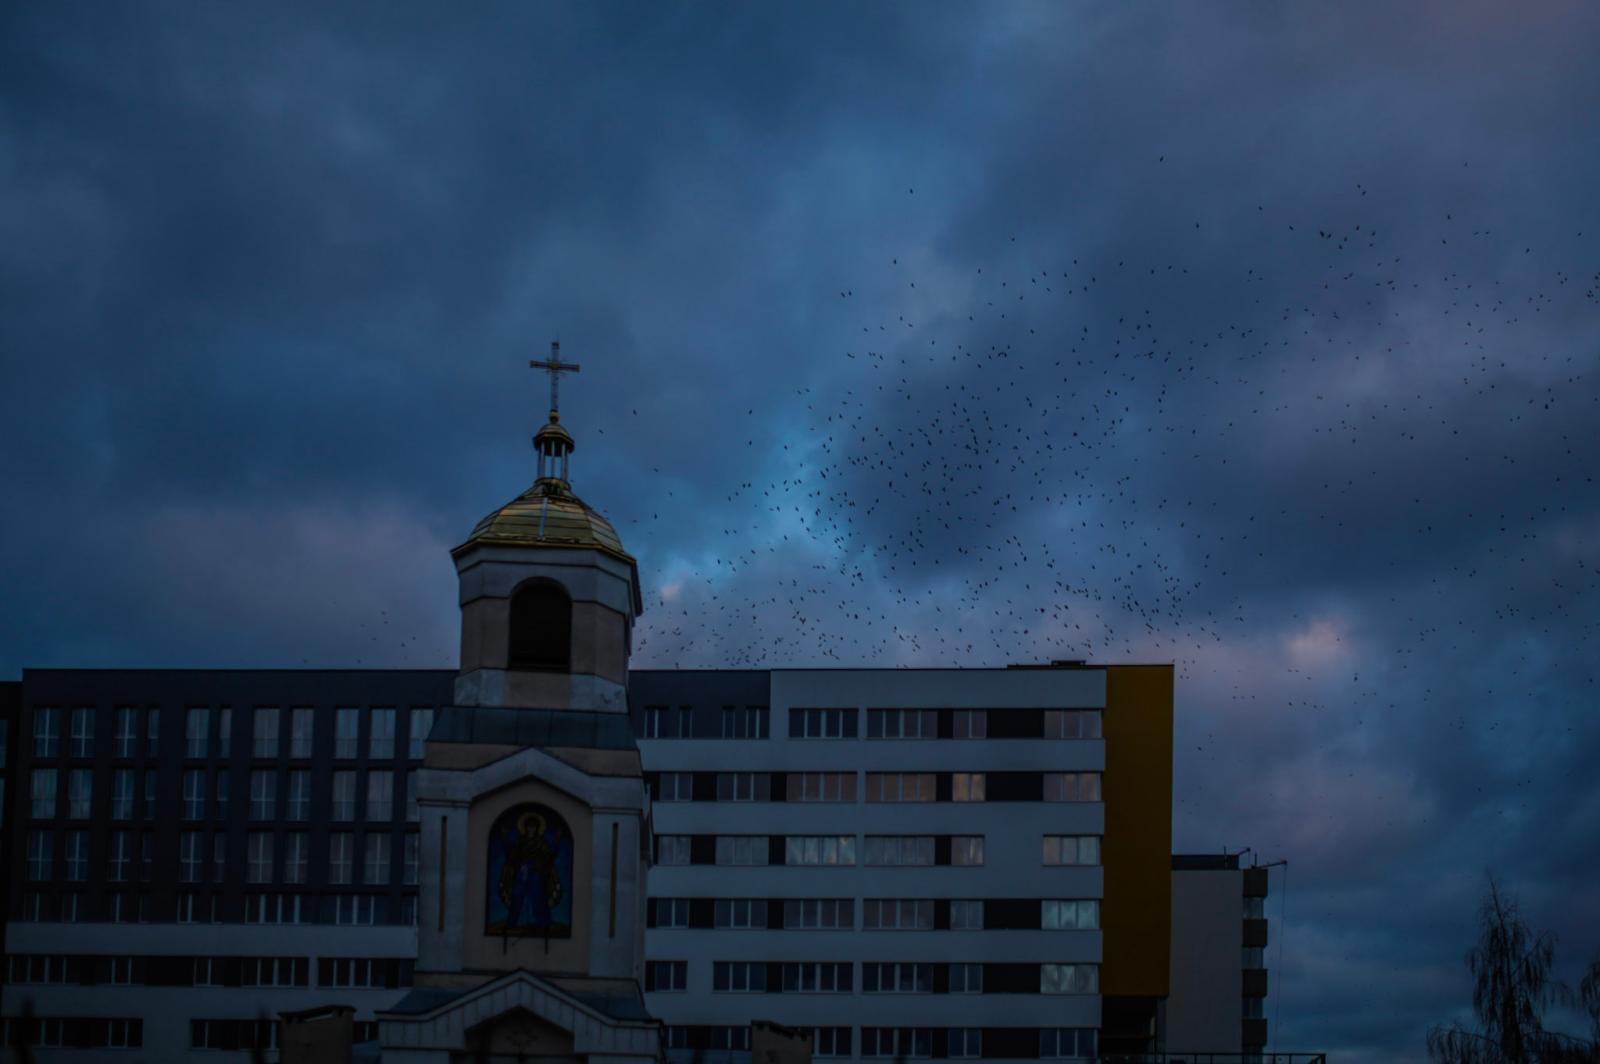 Crows fly in the skies of Lviv, Ukraine. Photo by Gian Marco Benedetto